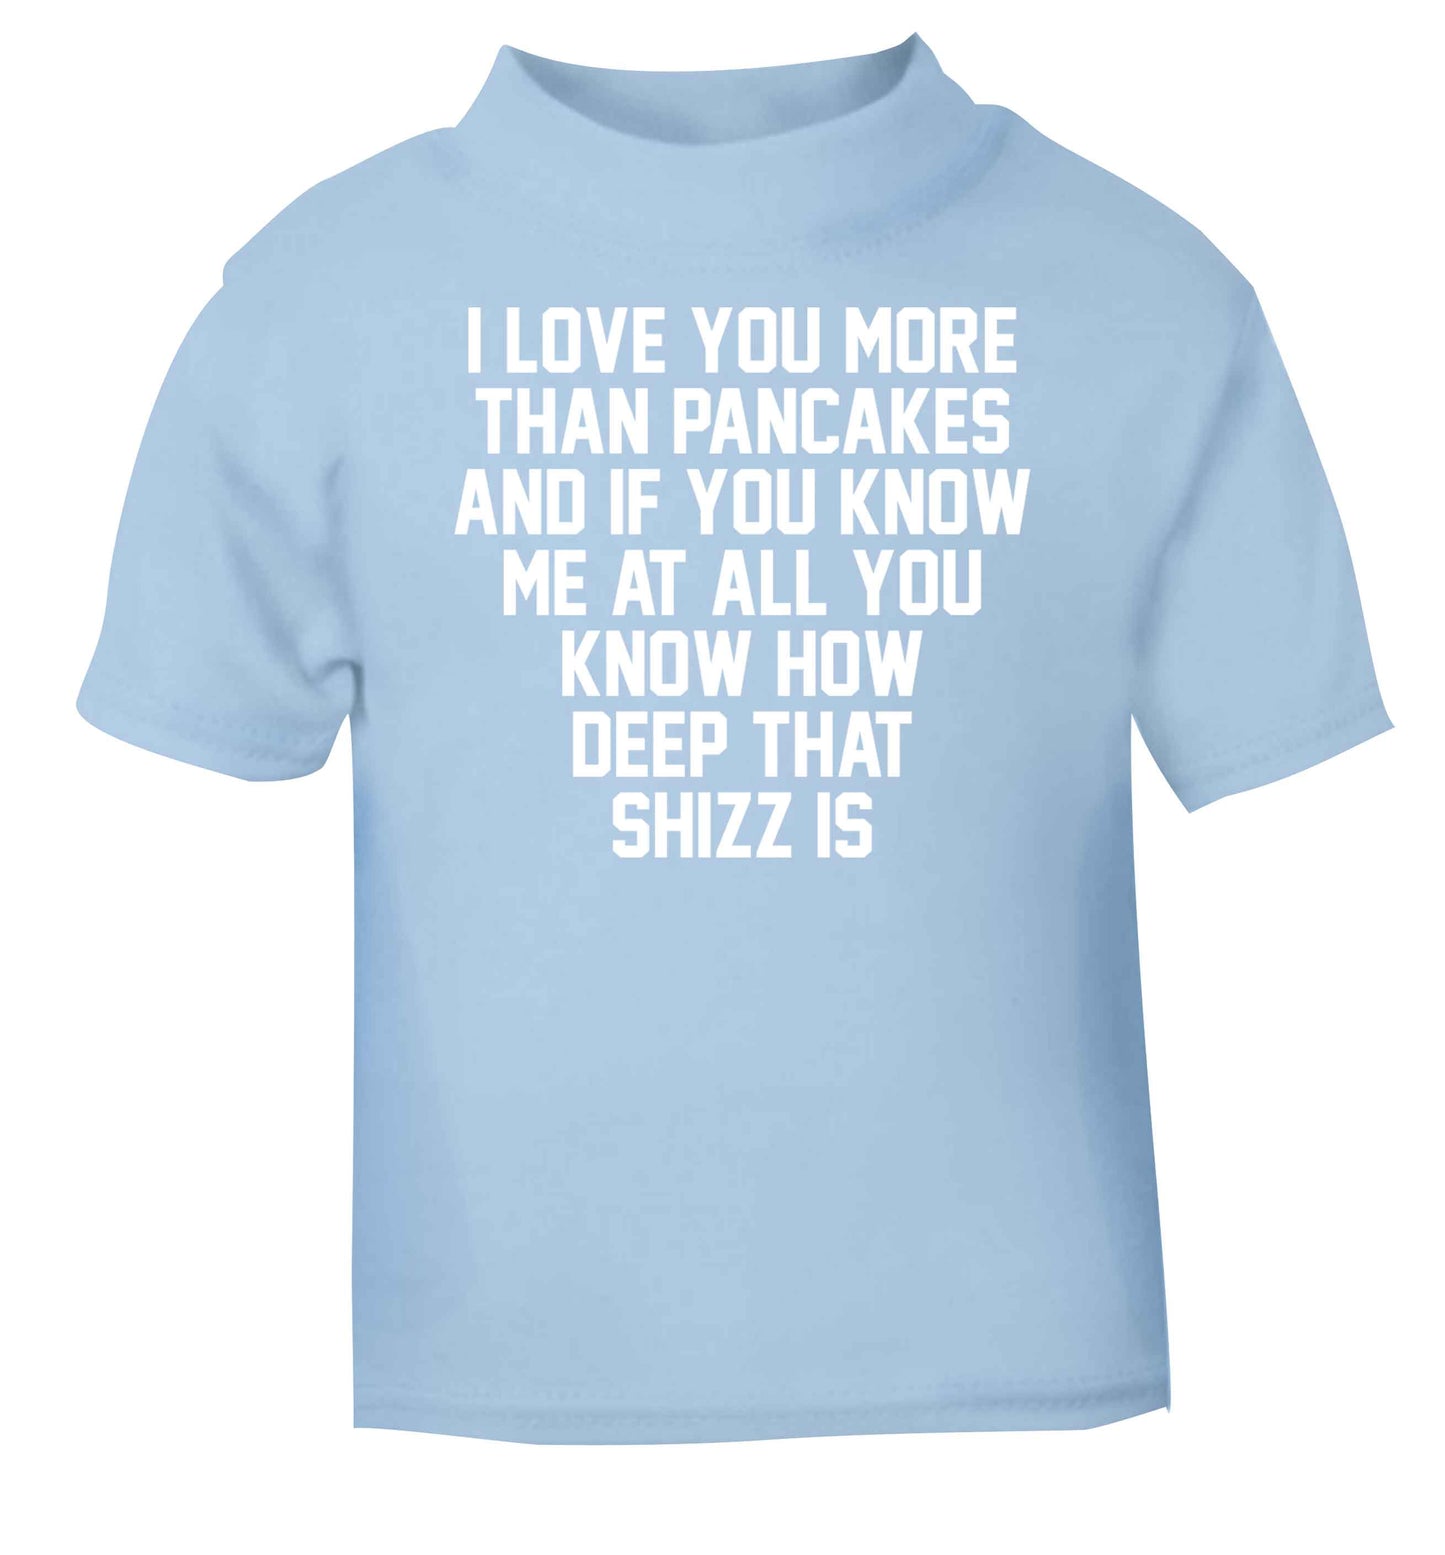 I love you more than pancakes and if you know me at all you know how deep that shizz is light blue baby toddler Tshirt 2 Years